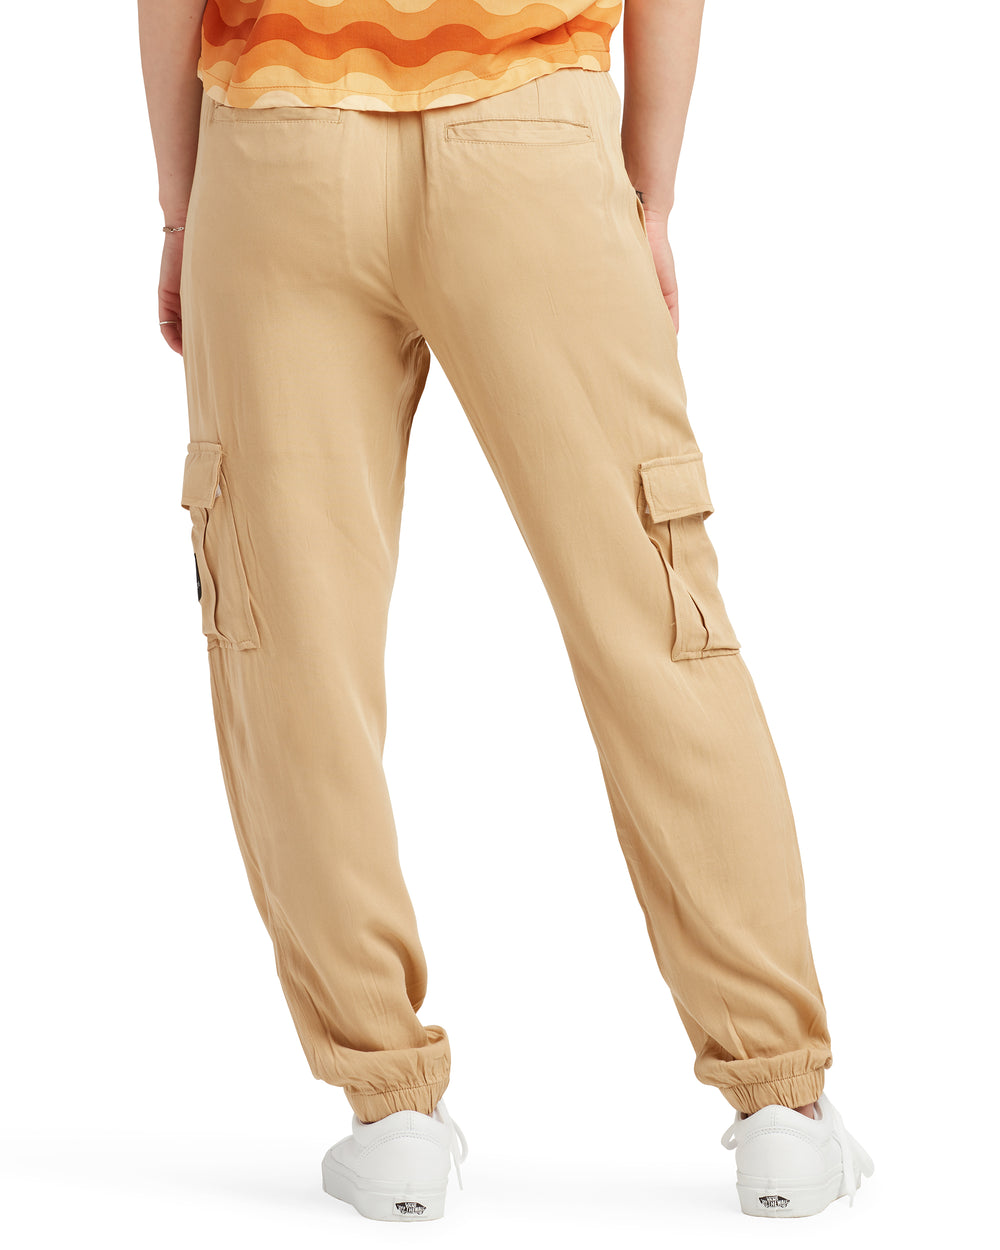 Myly Mid-Rise Cargo Jogger Pant - Tan - Body Glove